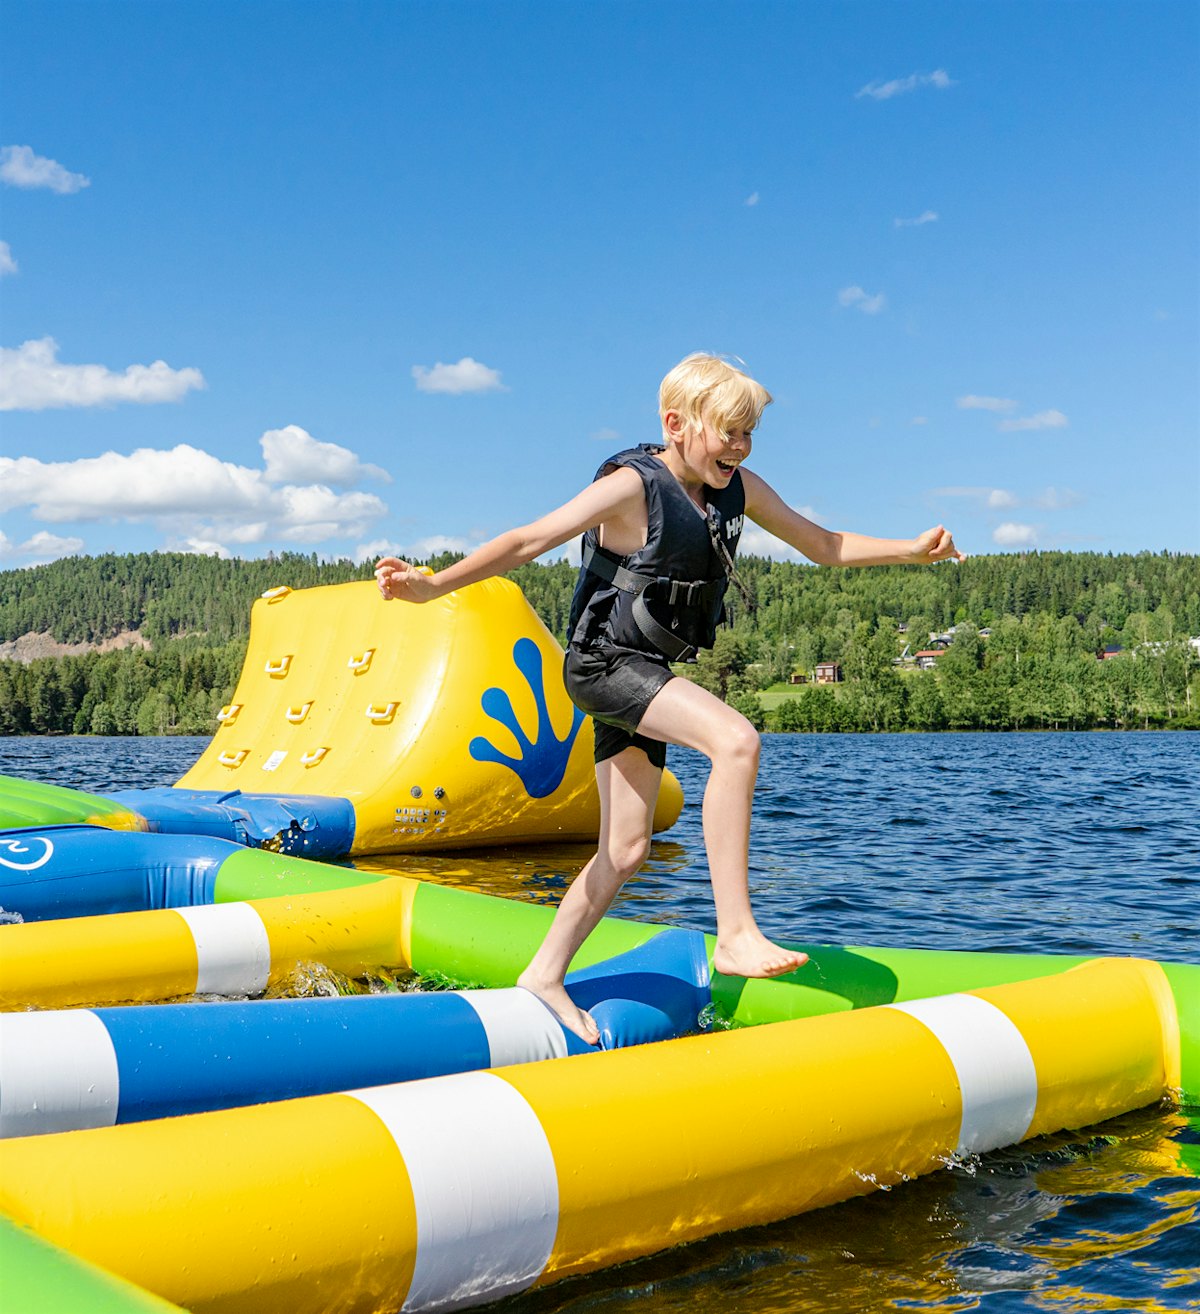 Boy runs smiling across a floating water park. Photo